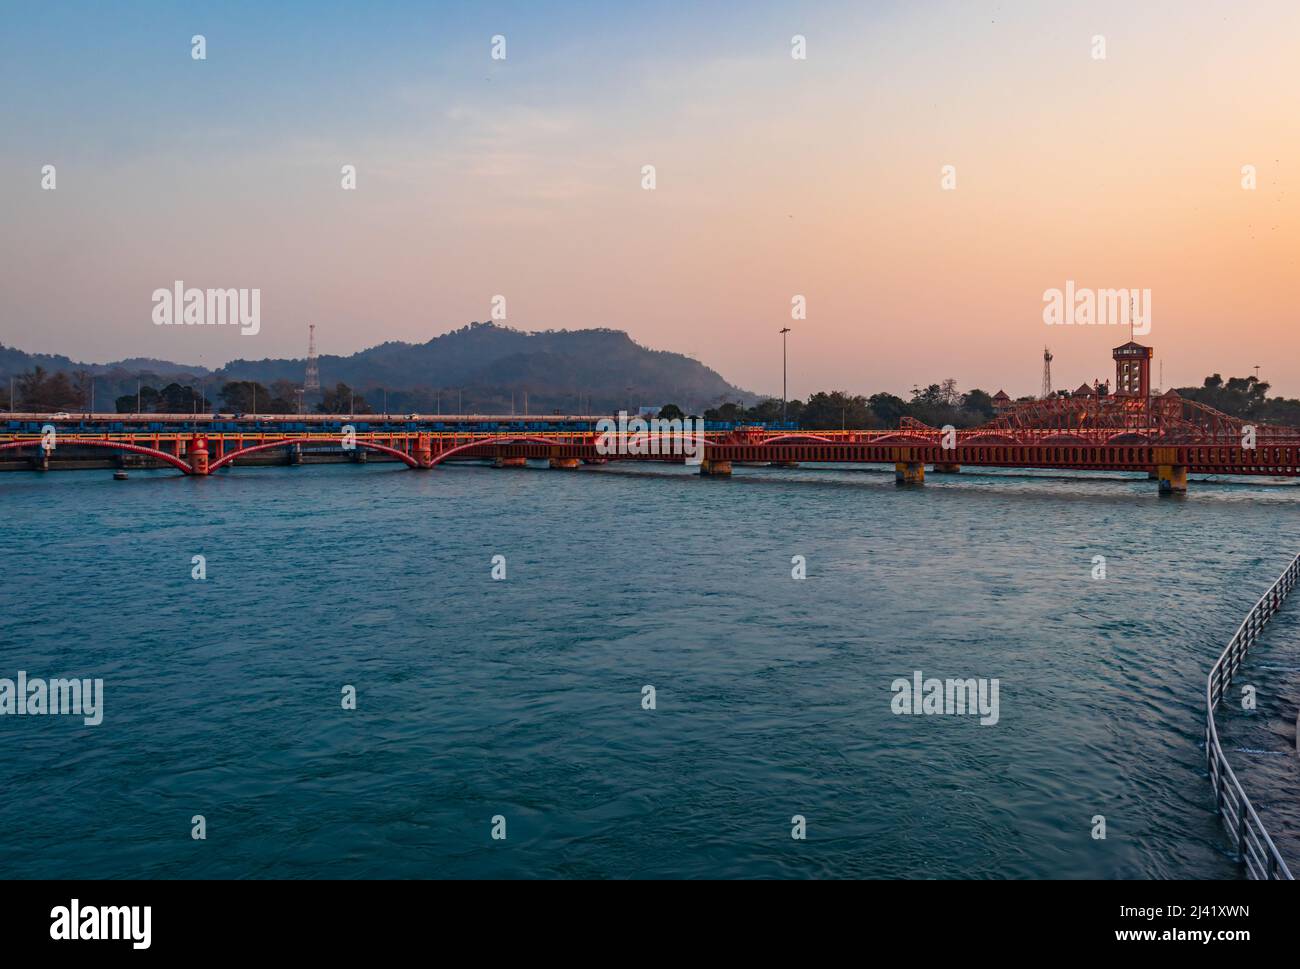 isolated iron bridge over ganges river with colorful sky at evening image is taken at haridwar uttrakhand india. Stock Photo